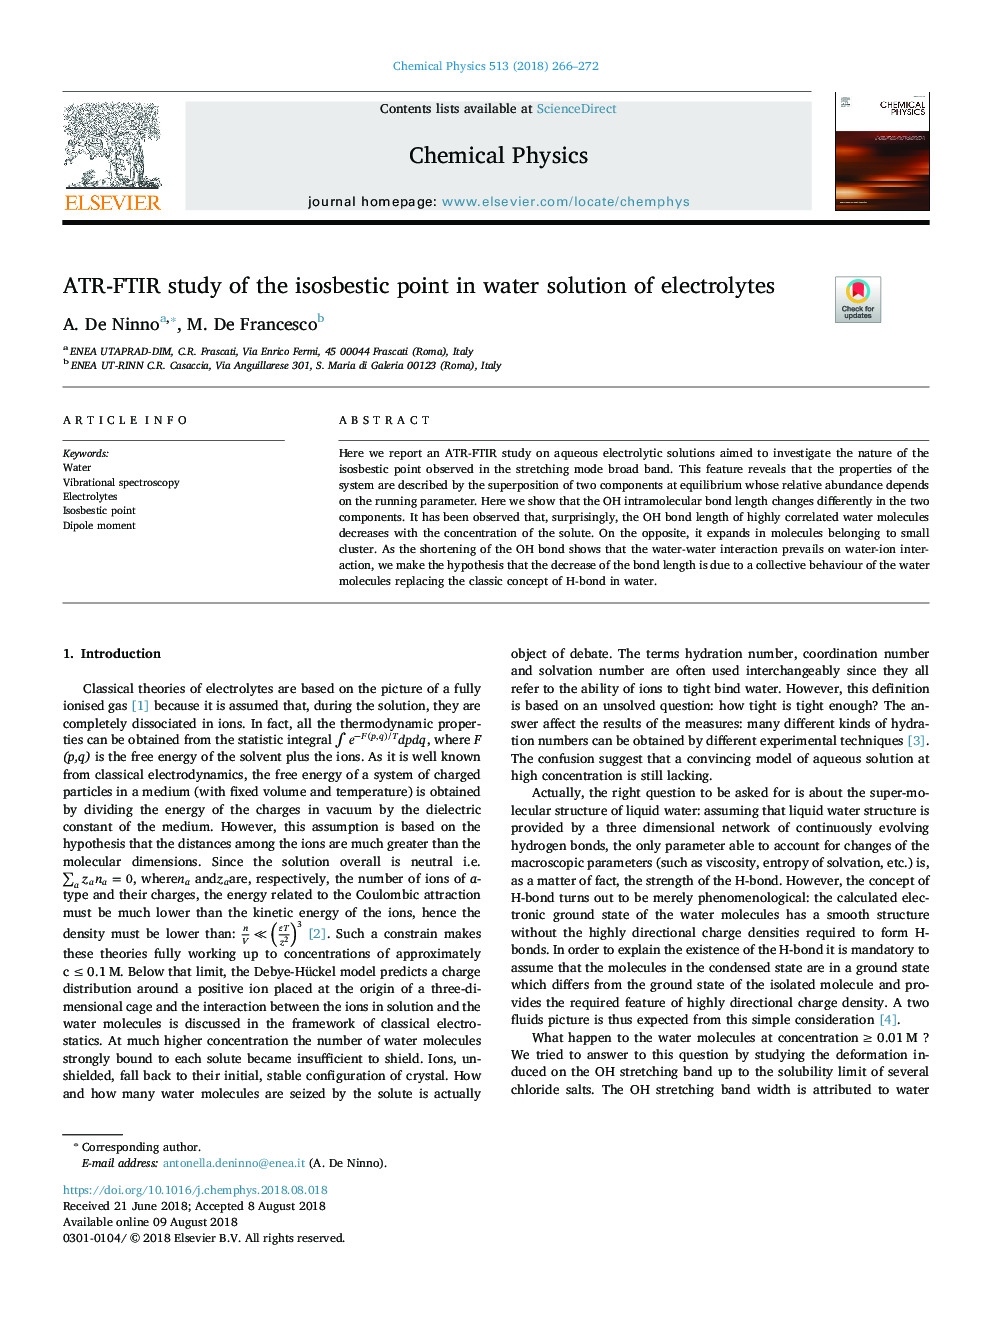 ATR-FTIR study of the isosbestic point in water solution of electrolytes